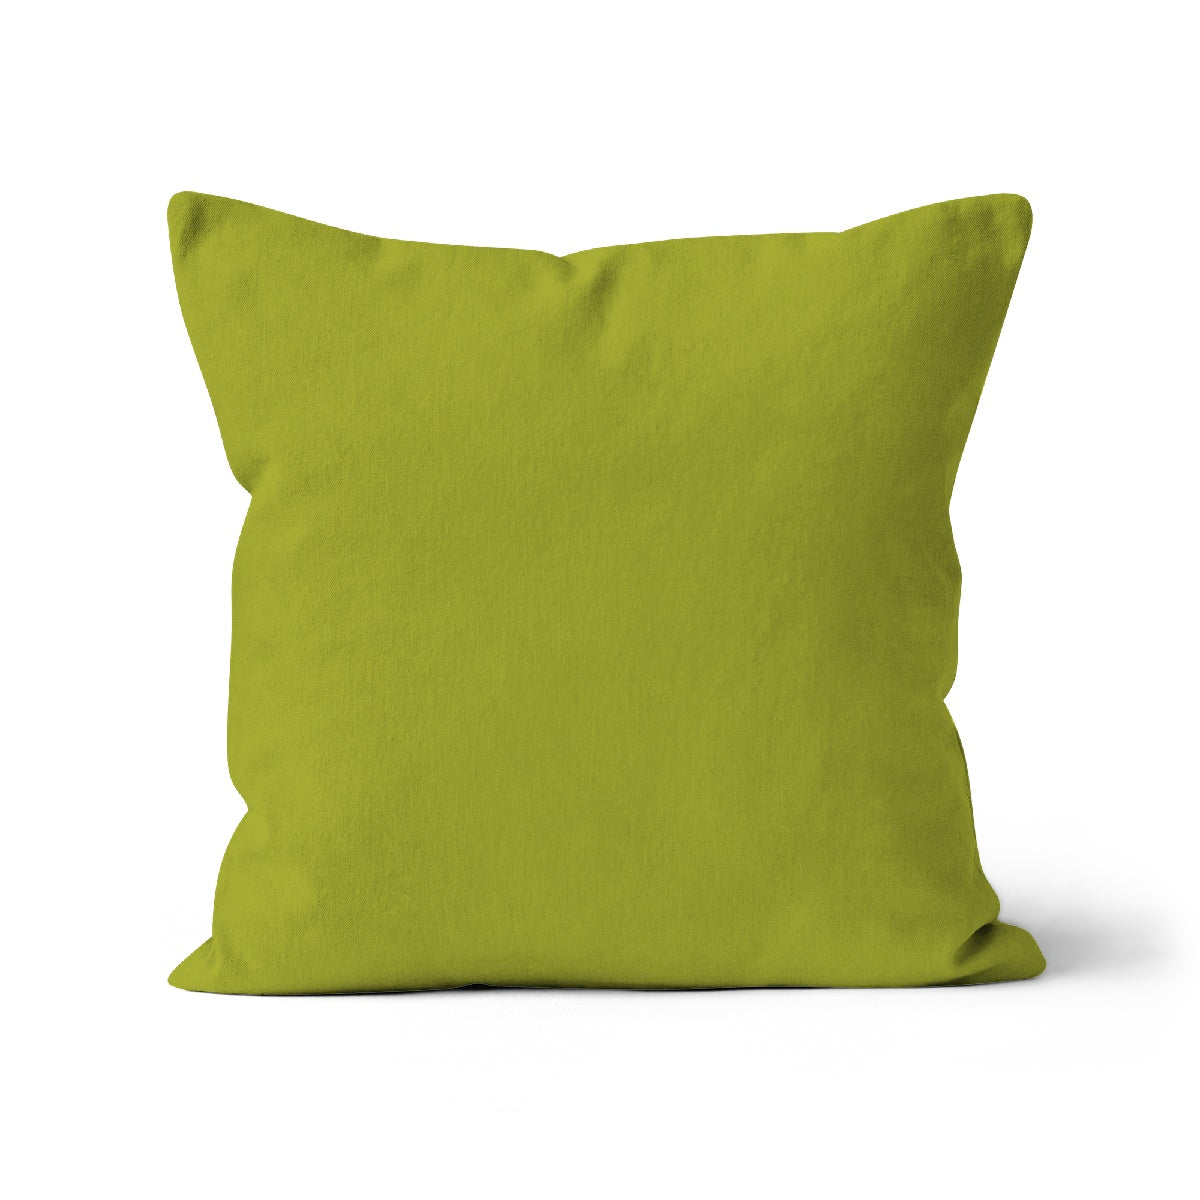 Pistachio green scatter cushion cover. Cotton cover, made in the UK, sustainably made, eco-friendly, organic homeware Affordable Soft Green Pillow, Buy Pistachio Green Cushion Cover Online, Designer Cushion Cover with Natural Patterns, Pistachio Green Velvet Pillowcase, Pistachio Green Cushion Cover for Sale, Soft-Hued Soft Furnishings, Elegant Pistachio Green Scatter Pillow, Garden-Inspired Home Accessories, Pistachio Green Interior Design,